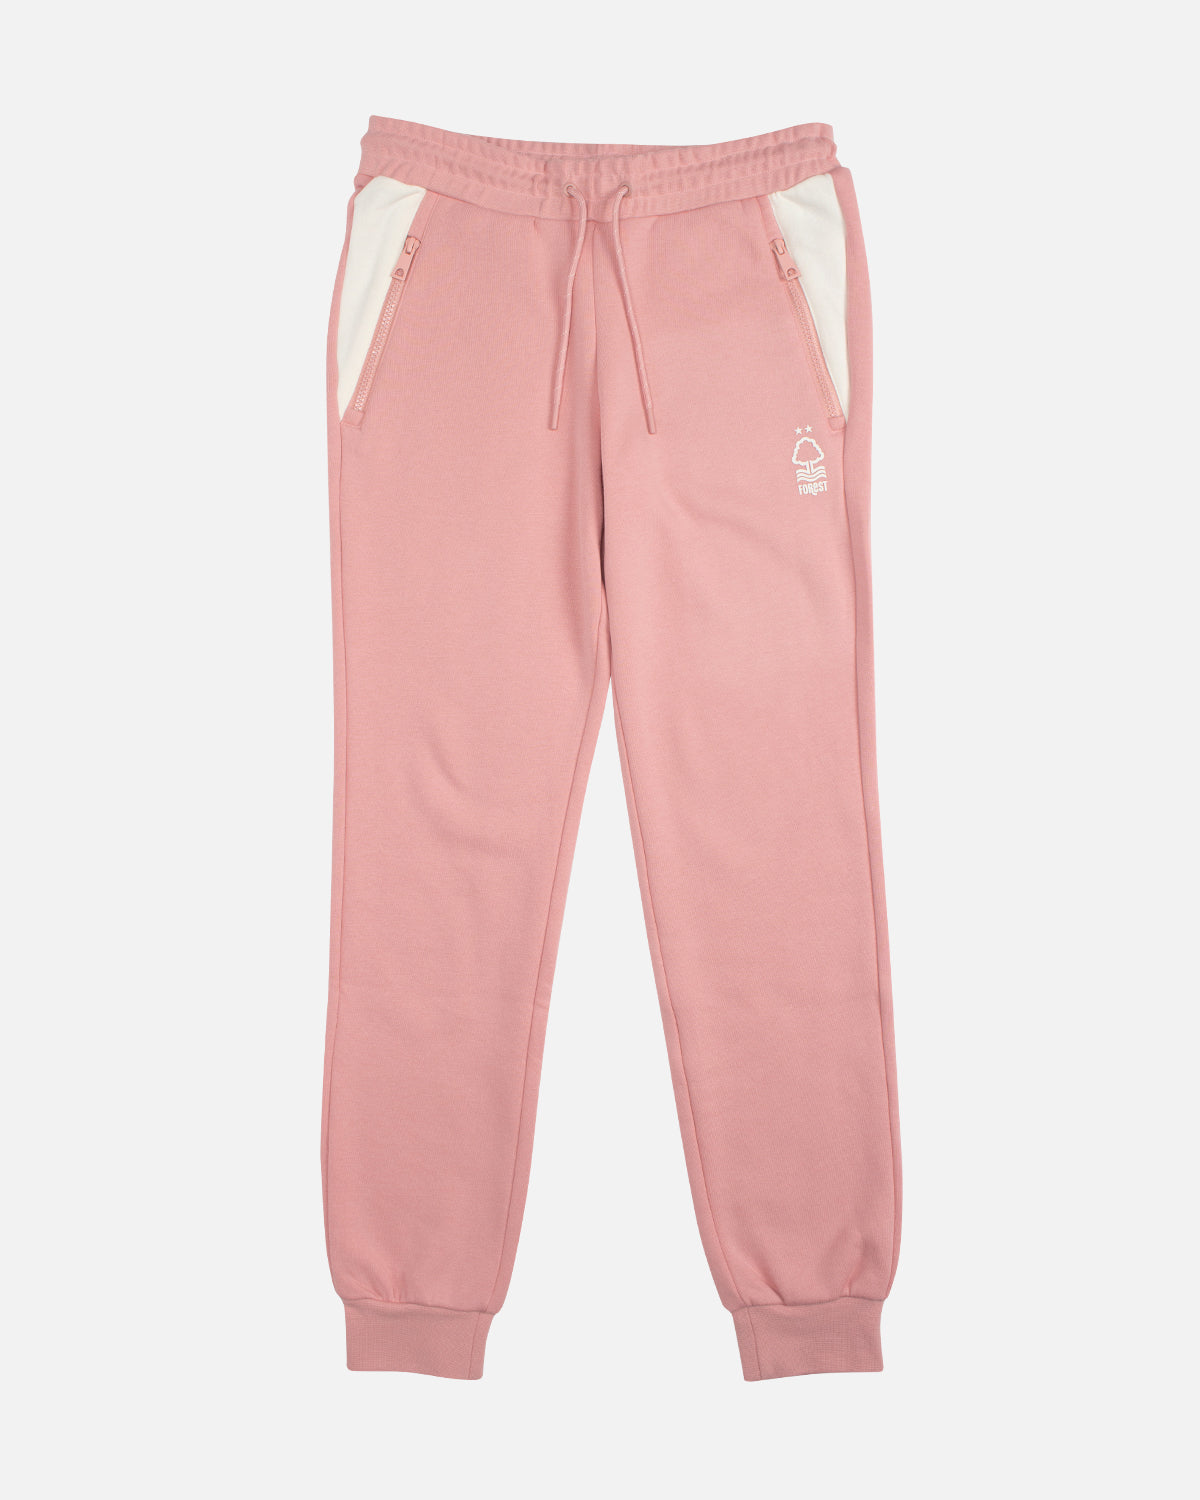 NFFC Womens Peach Essential Joggers